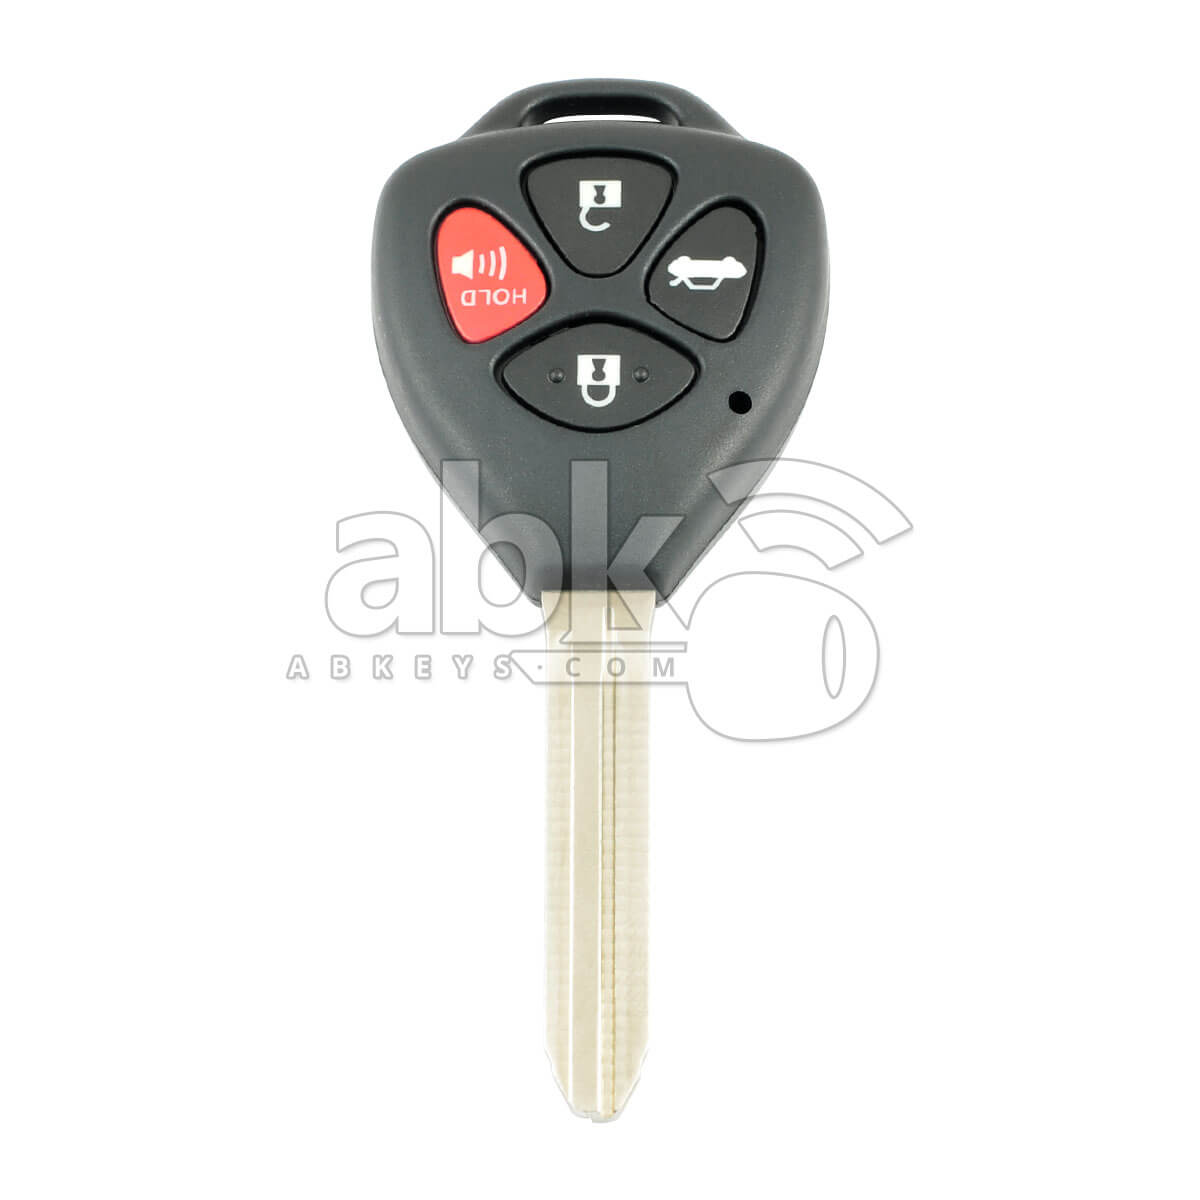 Genuine Toyota Corolla 2010+ Key Head Remote 4Buttons GQ4-29T 315MHz TOY43 89070-02620 89070-12820 -